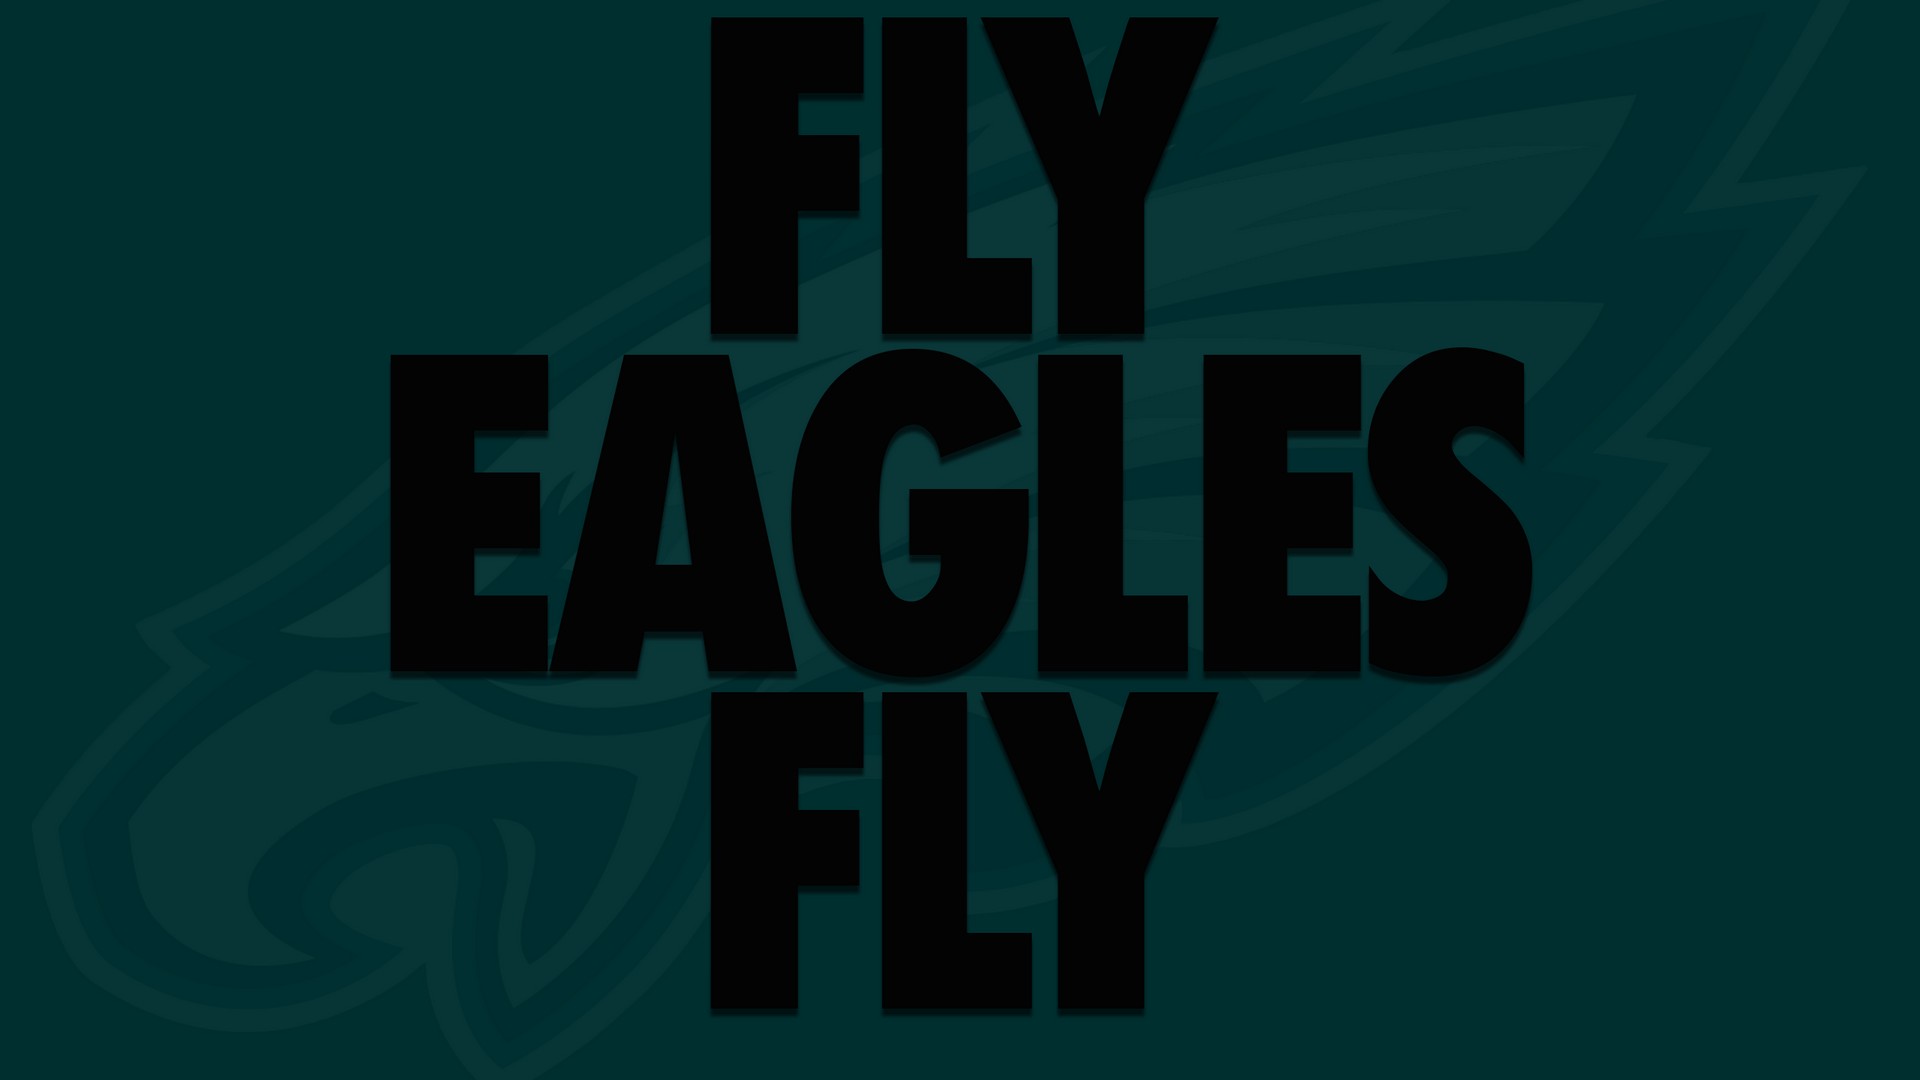 Wallpapers The Eagles with resolution 1920x1080 pixel. You can make this wallpaper for your Mac or Windows Desktop Background, iPhone, Android or Tablet and another Smartphone device